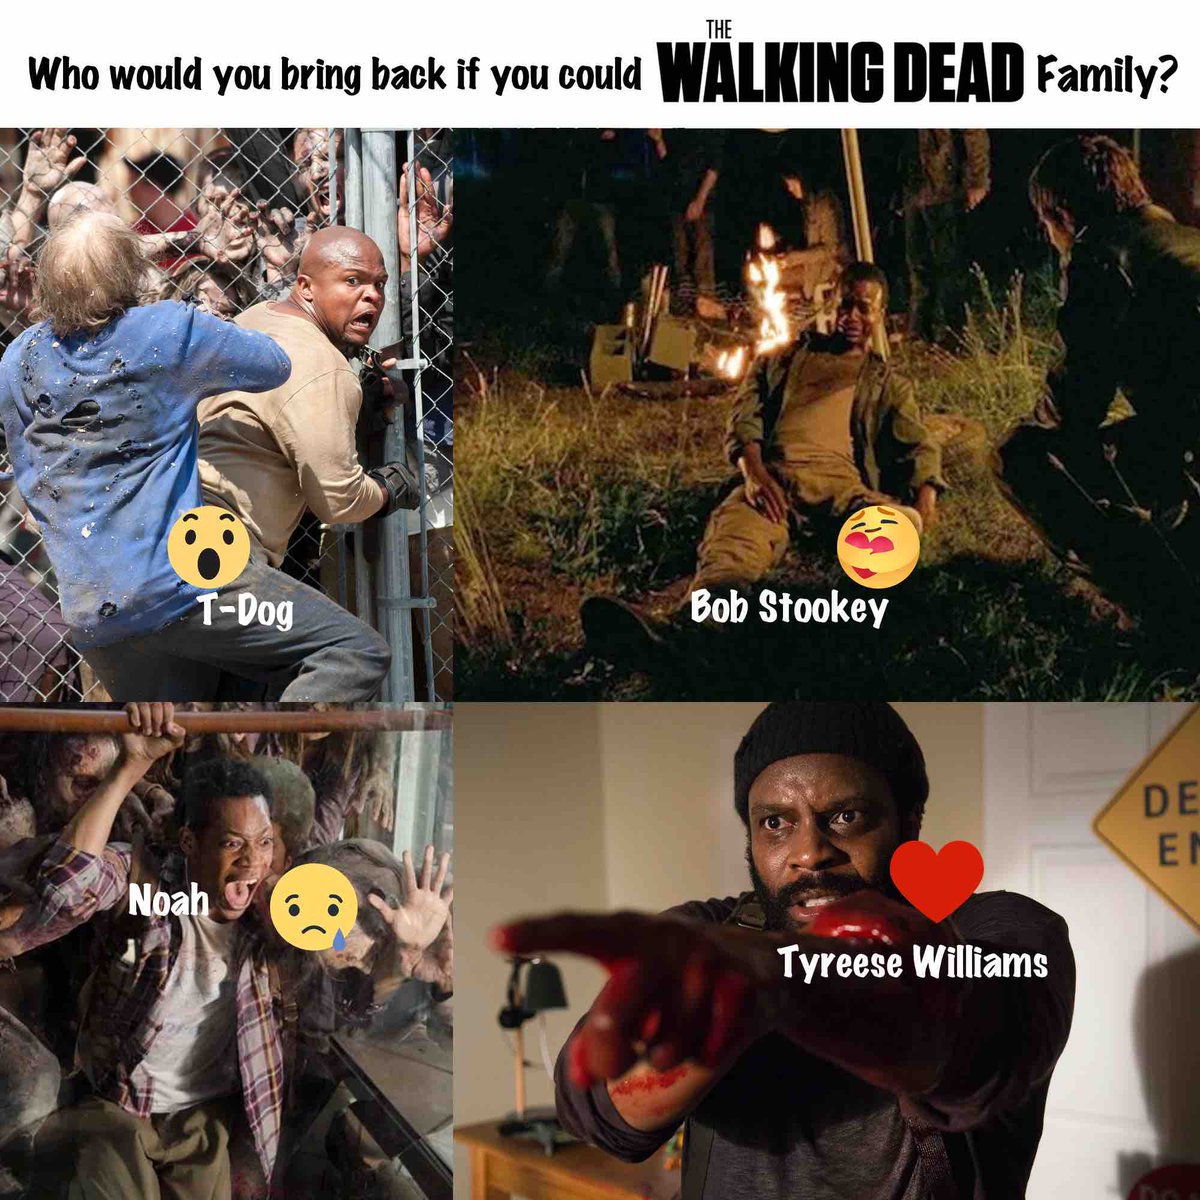 My #TheWalkingDeadFamily edit my SM friends @ChadLColeman @gilliardl_jr @ironesingleton

facebook.com/photo.php?fbid…

'Death can have me, WHEN IT EARNS ME!'

✌️💕🦋🦁

'I hope you make good use of blues you found

Making misery so proud!'

@thebrianfallon 

youtube.com/watch?v=ImM6Ii…